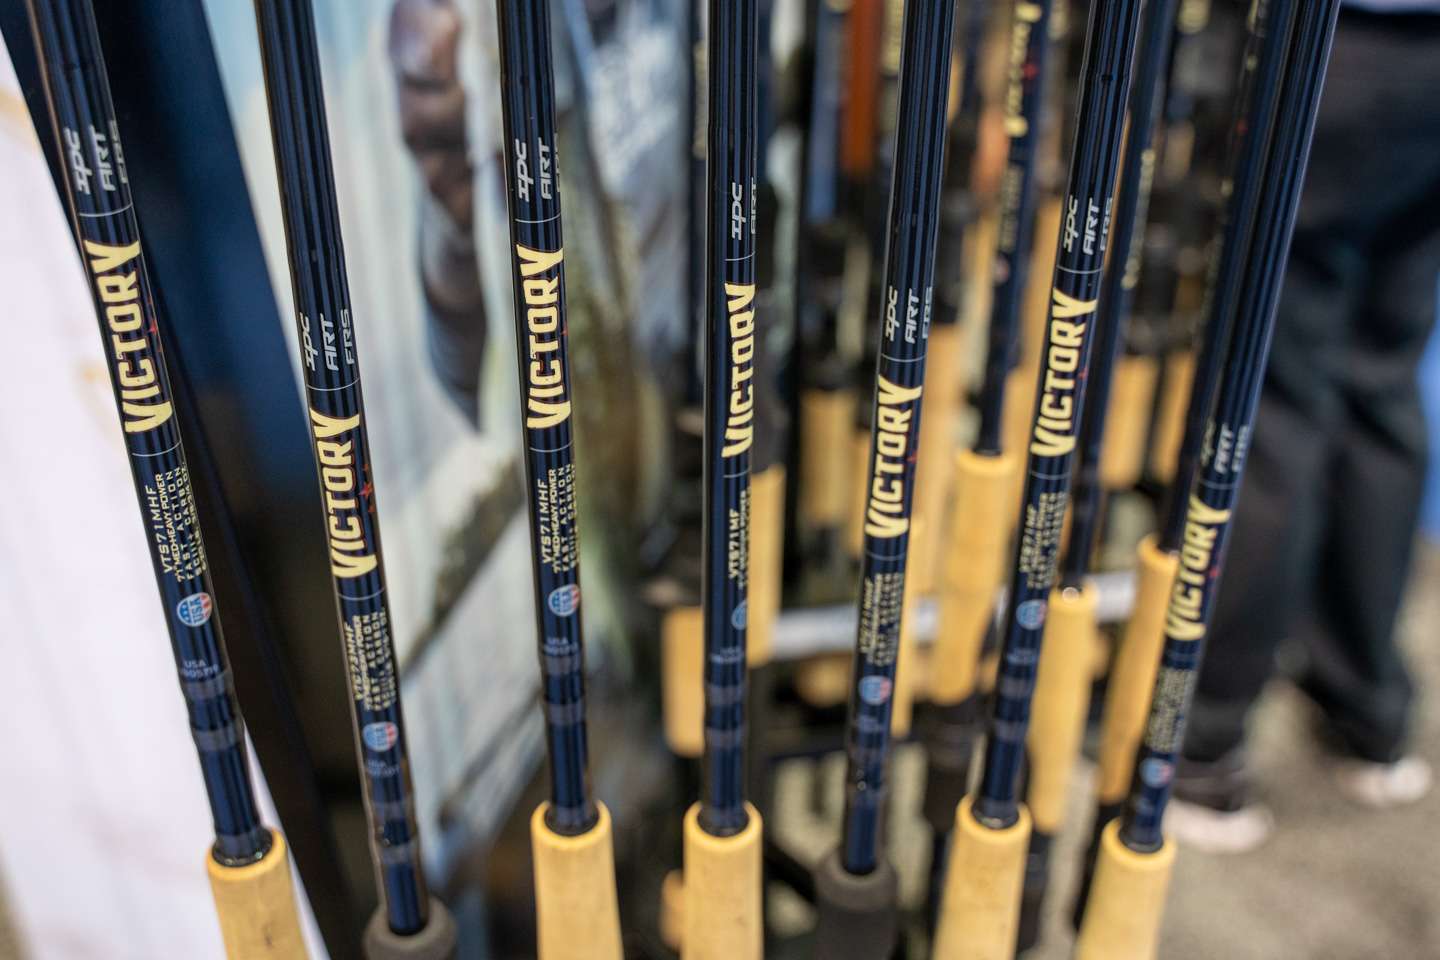 <b>St. Croix Victory Series Rod</b> <br>
St. Croix added 17 new models to the Victory lineup to make a total of 25 models. The Victory Series is an American-made rod that ranges in price from $180 to $260 depending on the model.